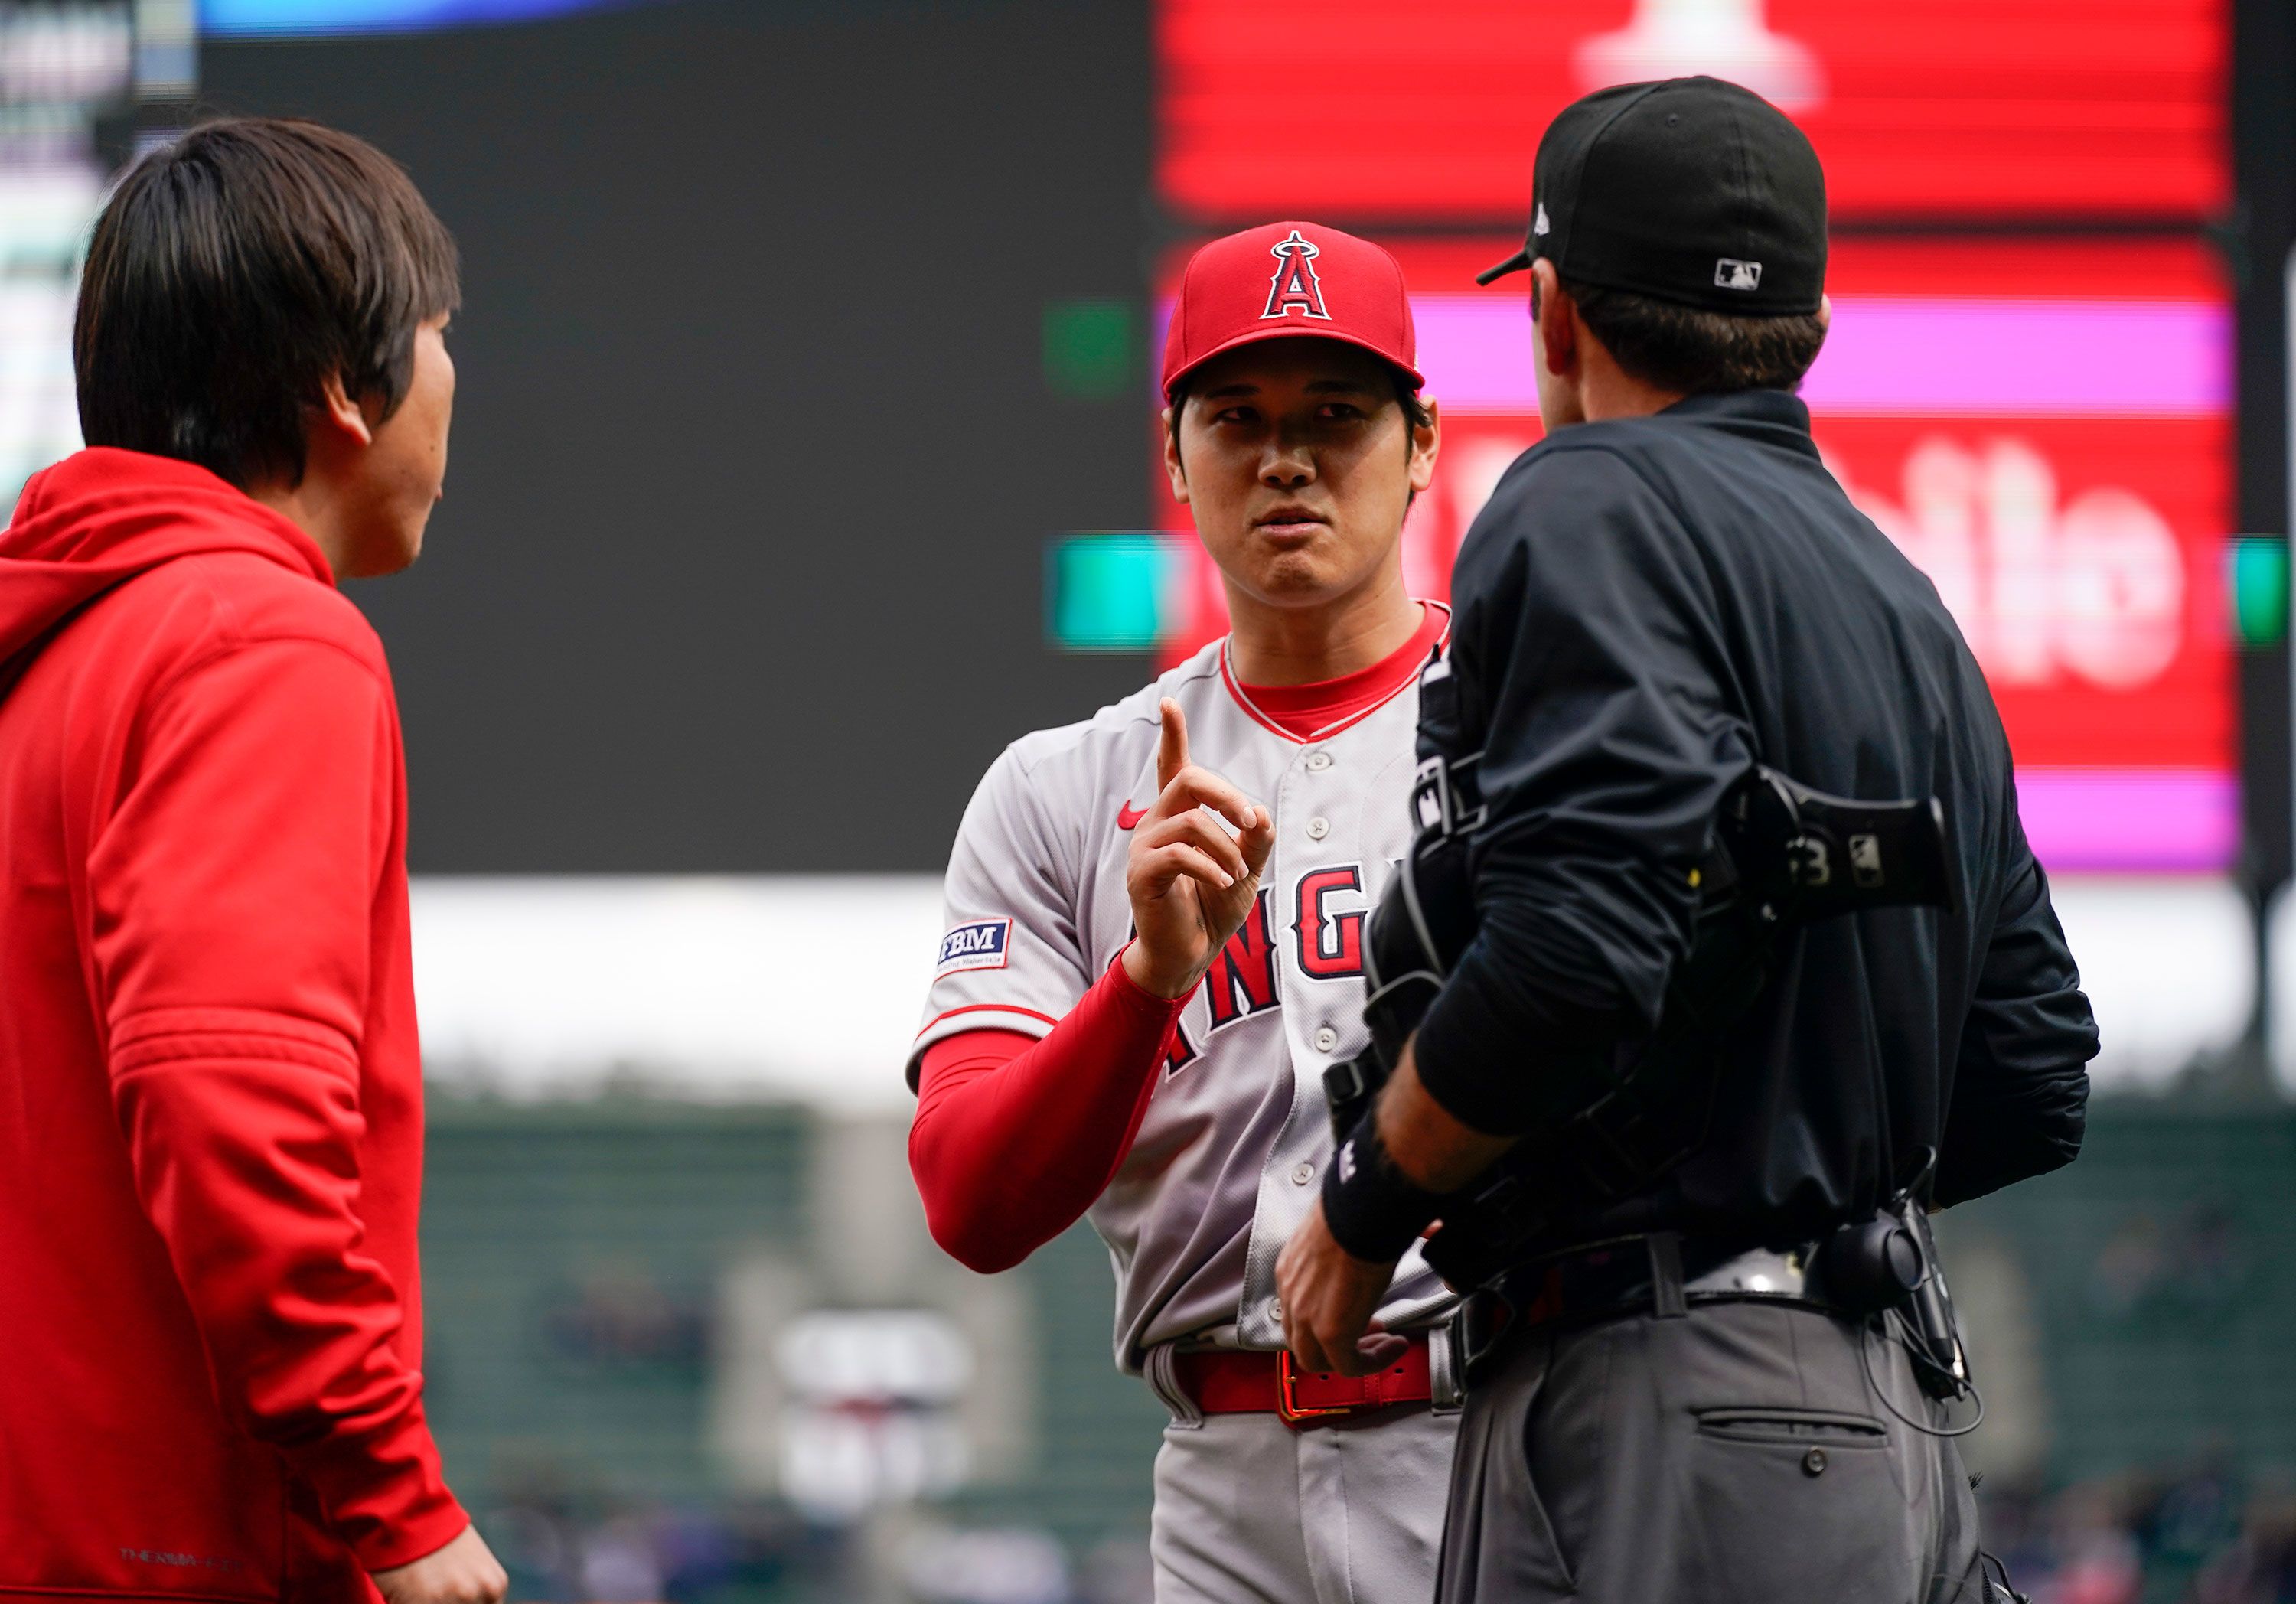 Shohei Ohtani 'simply thankful' for MLB All-Star Game experience